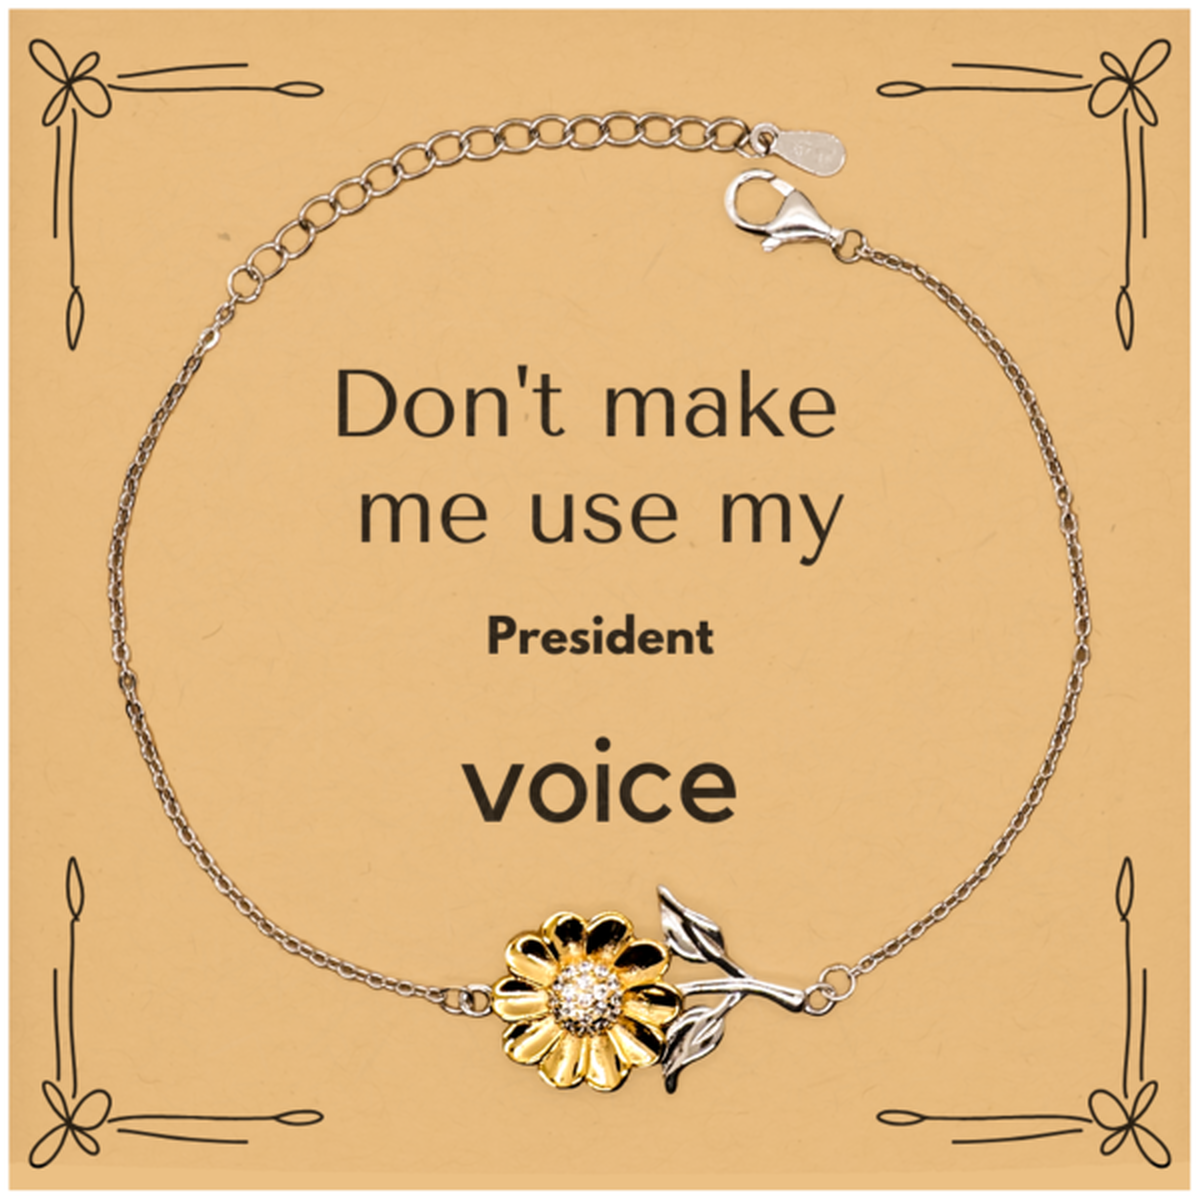 Don't make me use my President voice, Sarcasm President Card Gifts, Christmas President Sunflower Bracelet Birthday Unique Gifts For President Coworkers, Men, Women, Colleague, Friends